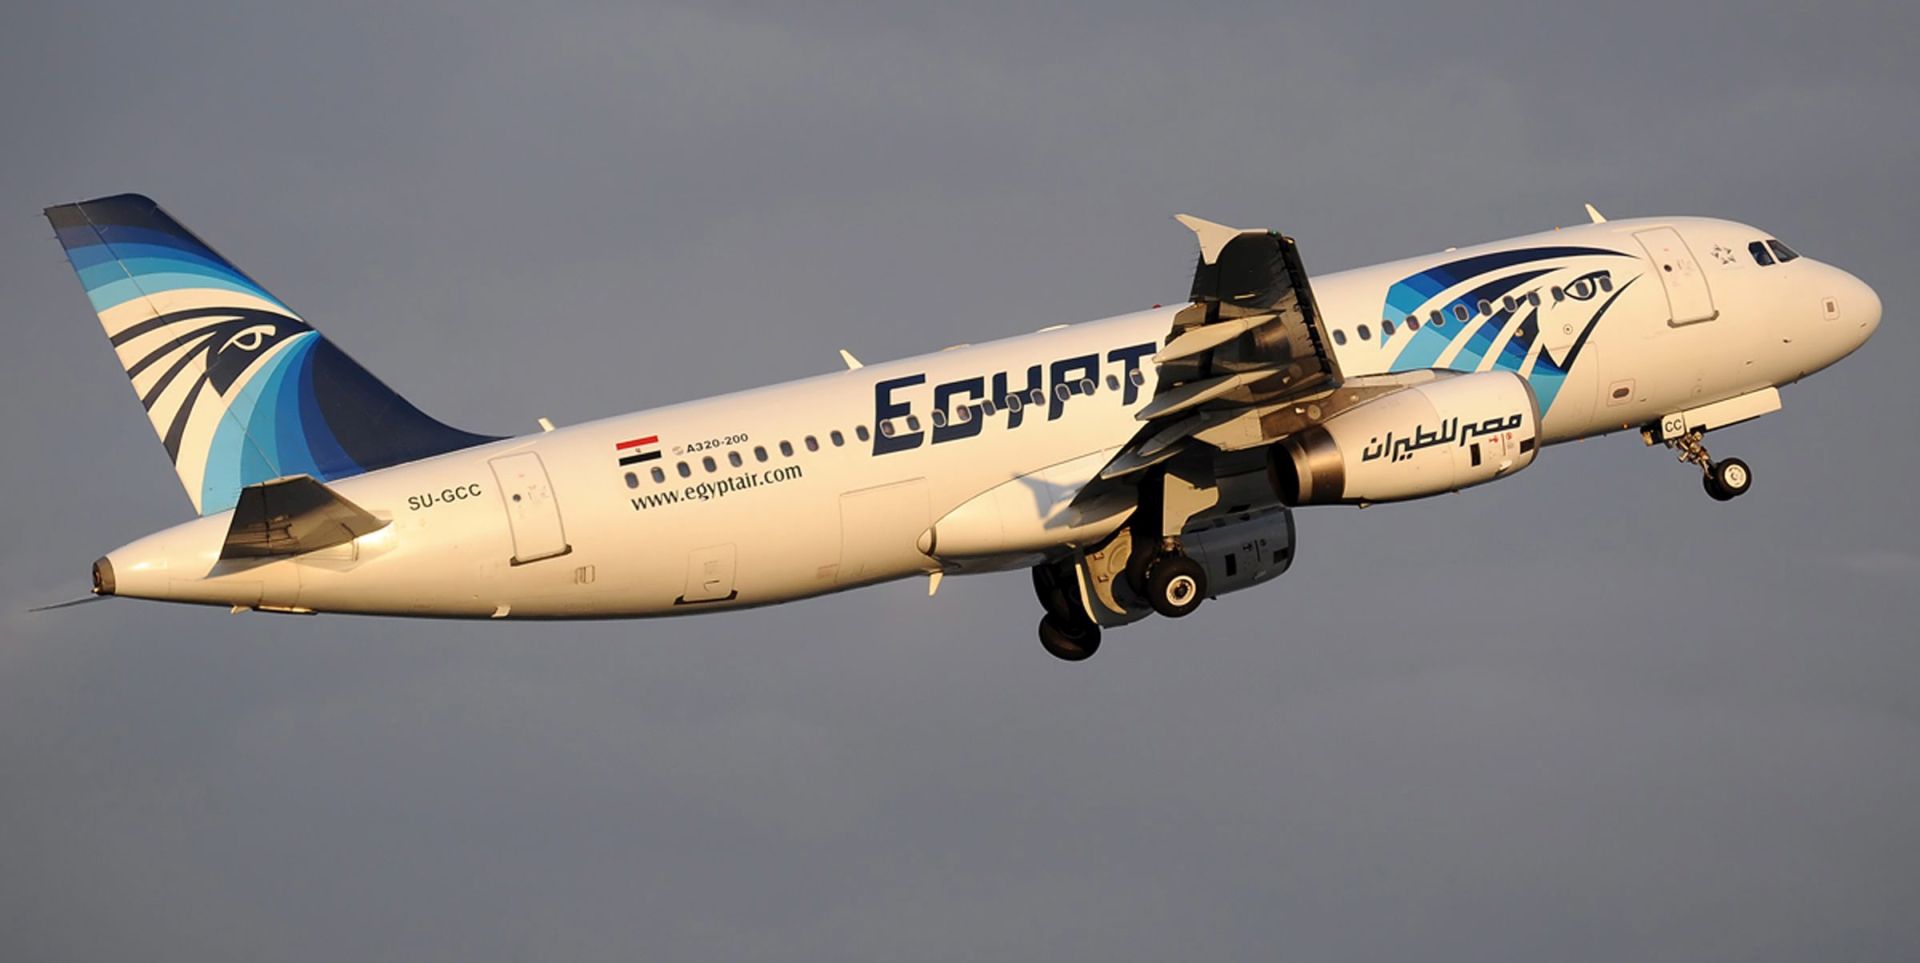 epa05369255 (FILE) A file picture dated 21 April 2012 shows an EgyptAir Airbus A320 with SU-GCC registration at Istanbul Airport, Turkey. According to a statement by Egyptian investigators on 16 June 2016, the wreckage and cockpit voice recorder of the EgyptAir Airbus 320 plane have been located by a search vessel. The EgyptAir passenger jet had left Paris bound for Cairo with 66 people on board, but crashed into the Mediterranean Sea early on 19 May for unknown reasons.  EPA/SPOT TR - KIVANC UCAN MANDATORY CREDIT: SPOT TR - KIVANC UCAN  EDITORIAL USE ONLY/NO SALES